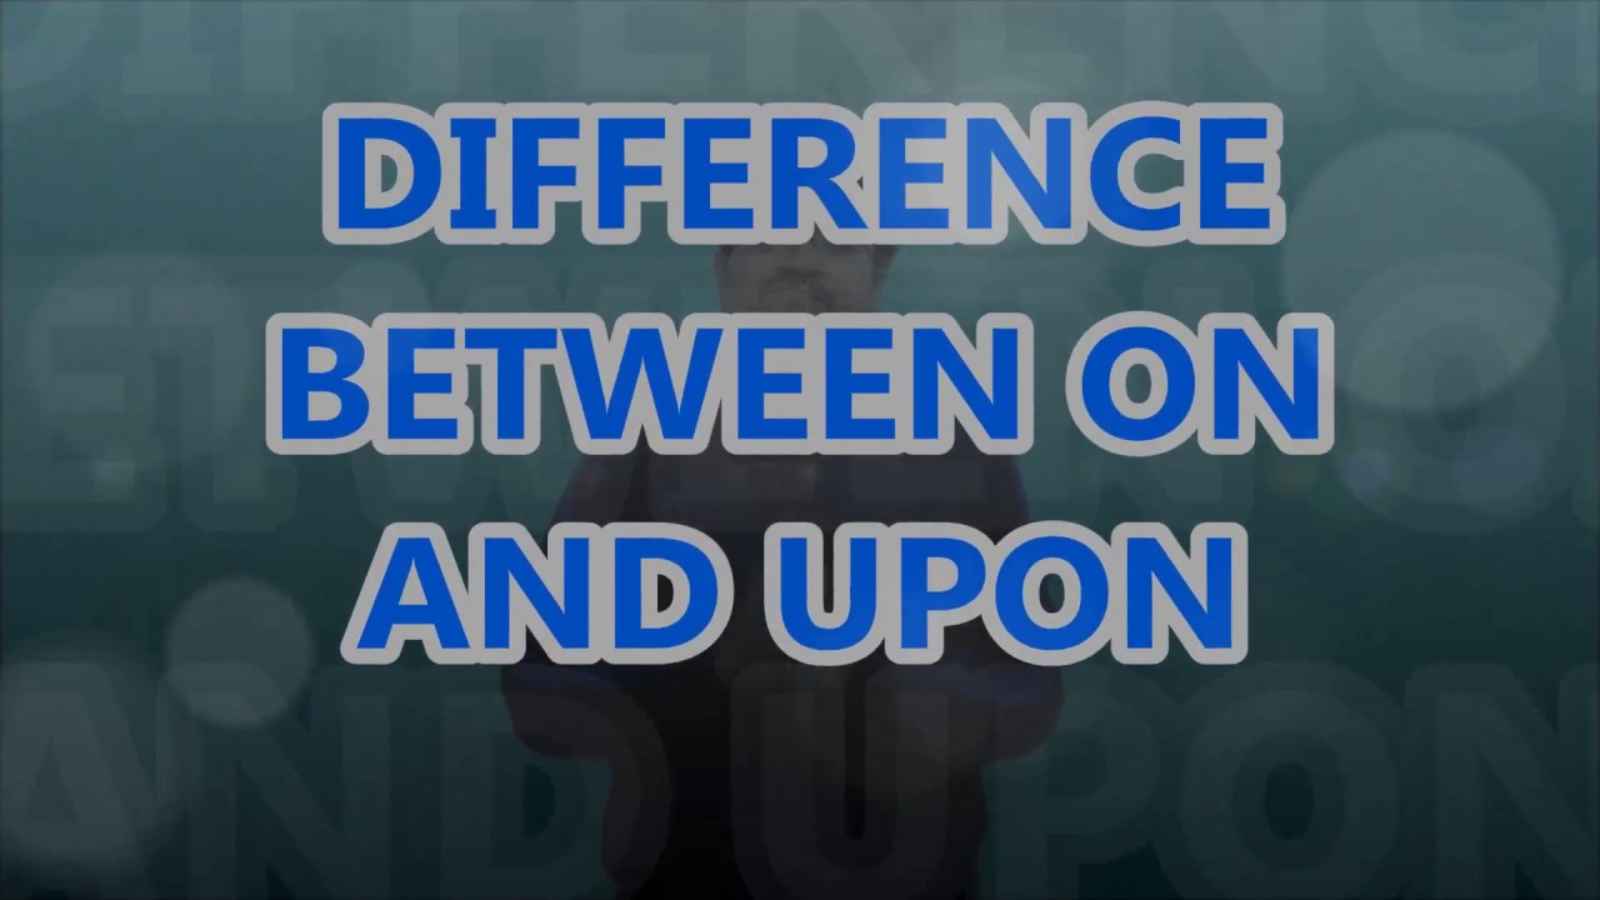 On vs Upon: Difference between On and Upon